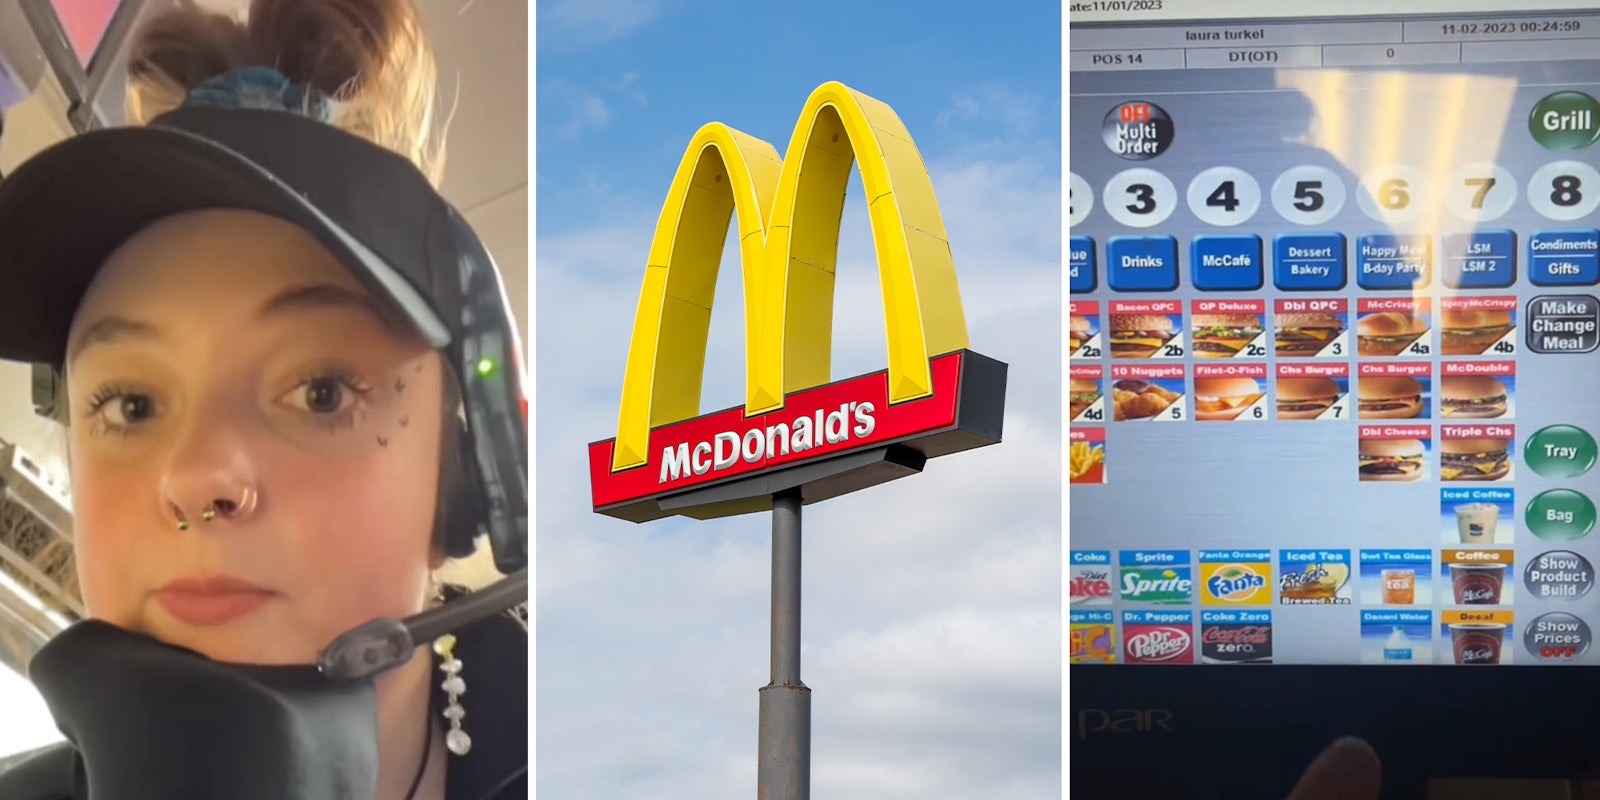 McDonald’s worker shows what it looks like when you place an app order